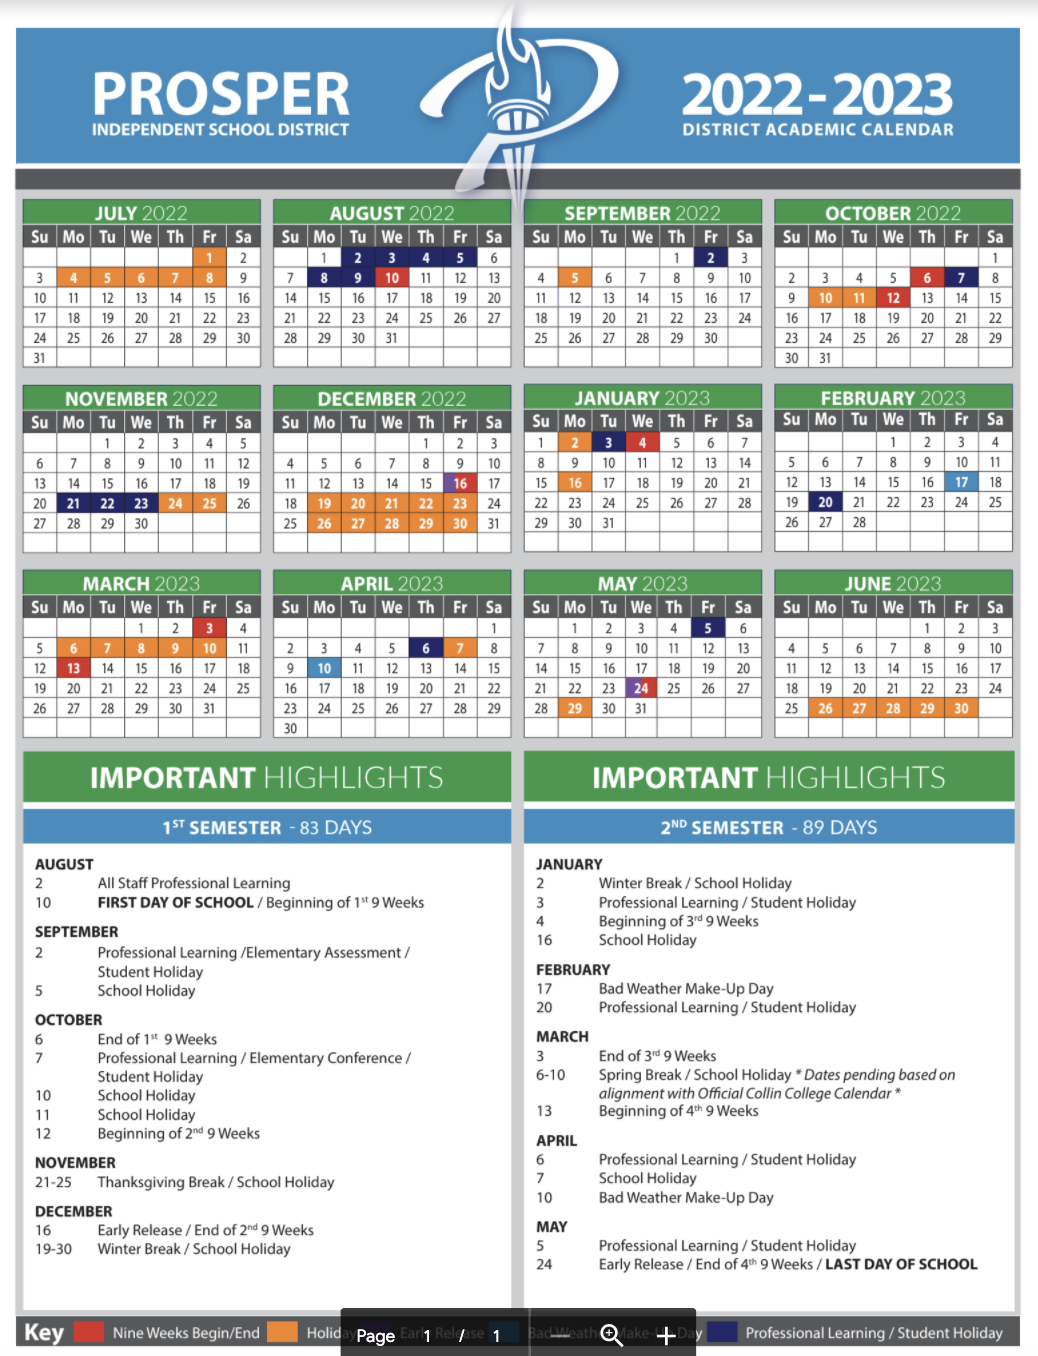 Pisd Calendar 2022 2023 Here Are Prosper Isd's School Calendars For The 2022-2023 And The 2023-2024  School Years | Cities | Checkoutdfw.com